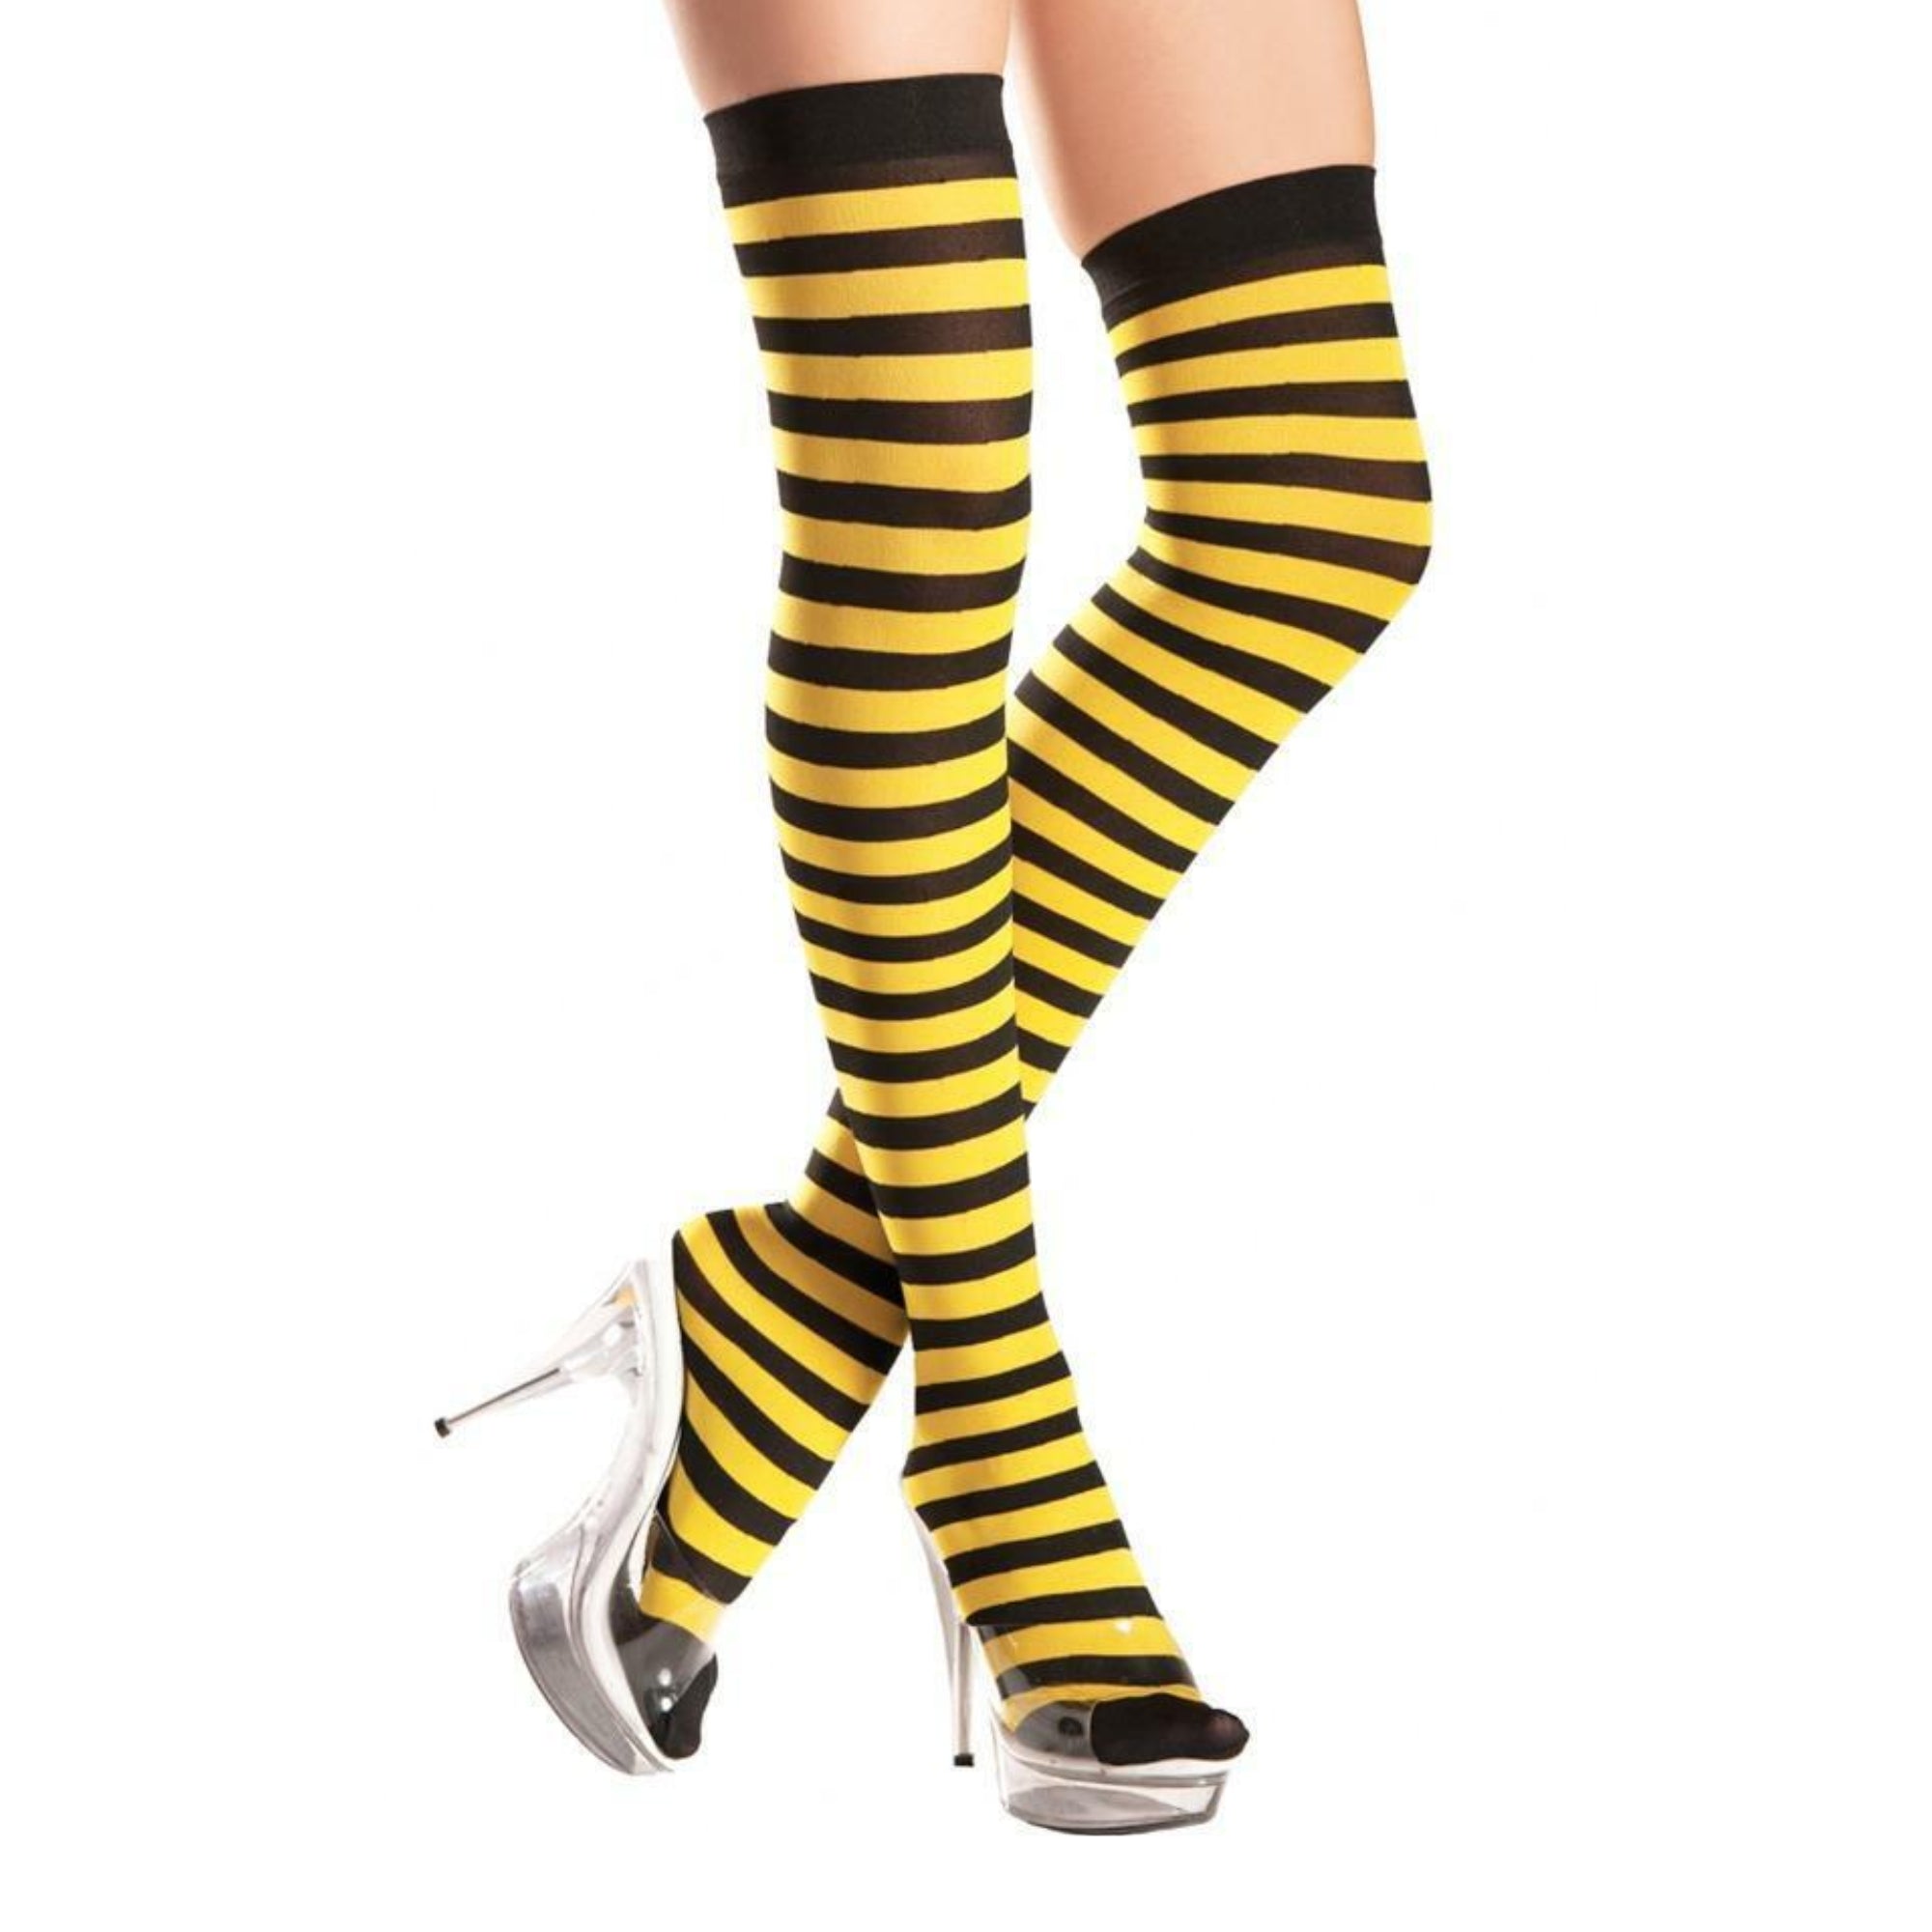 Thin Striped Patterned Socks (Thigh High) from the Sock Panda Yellow